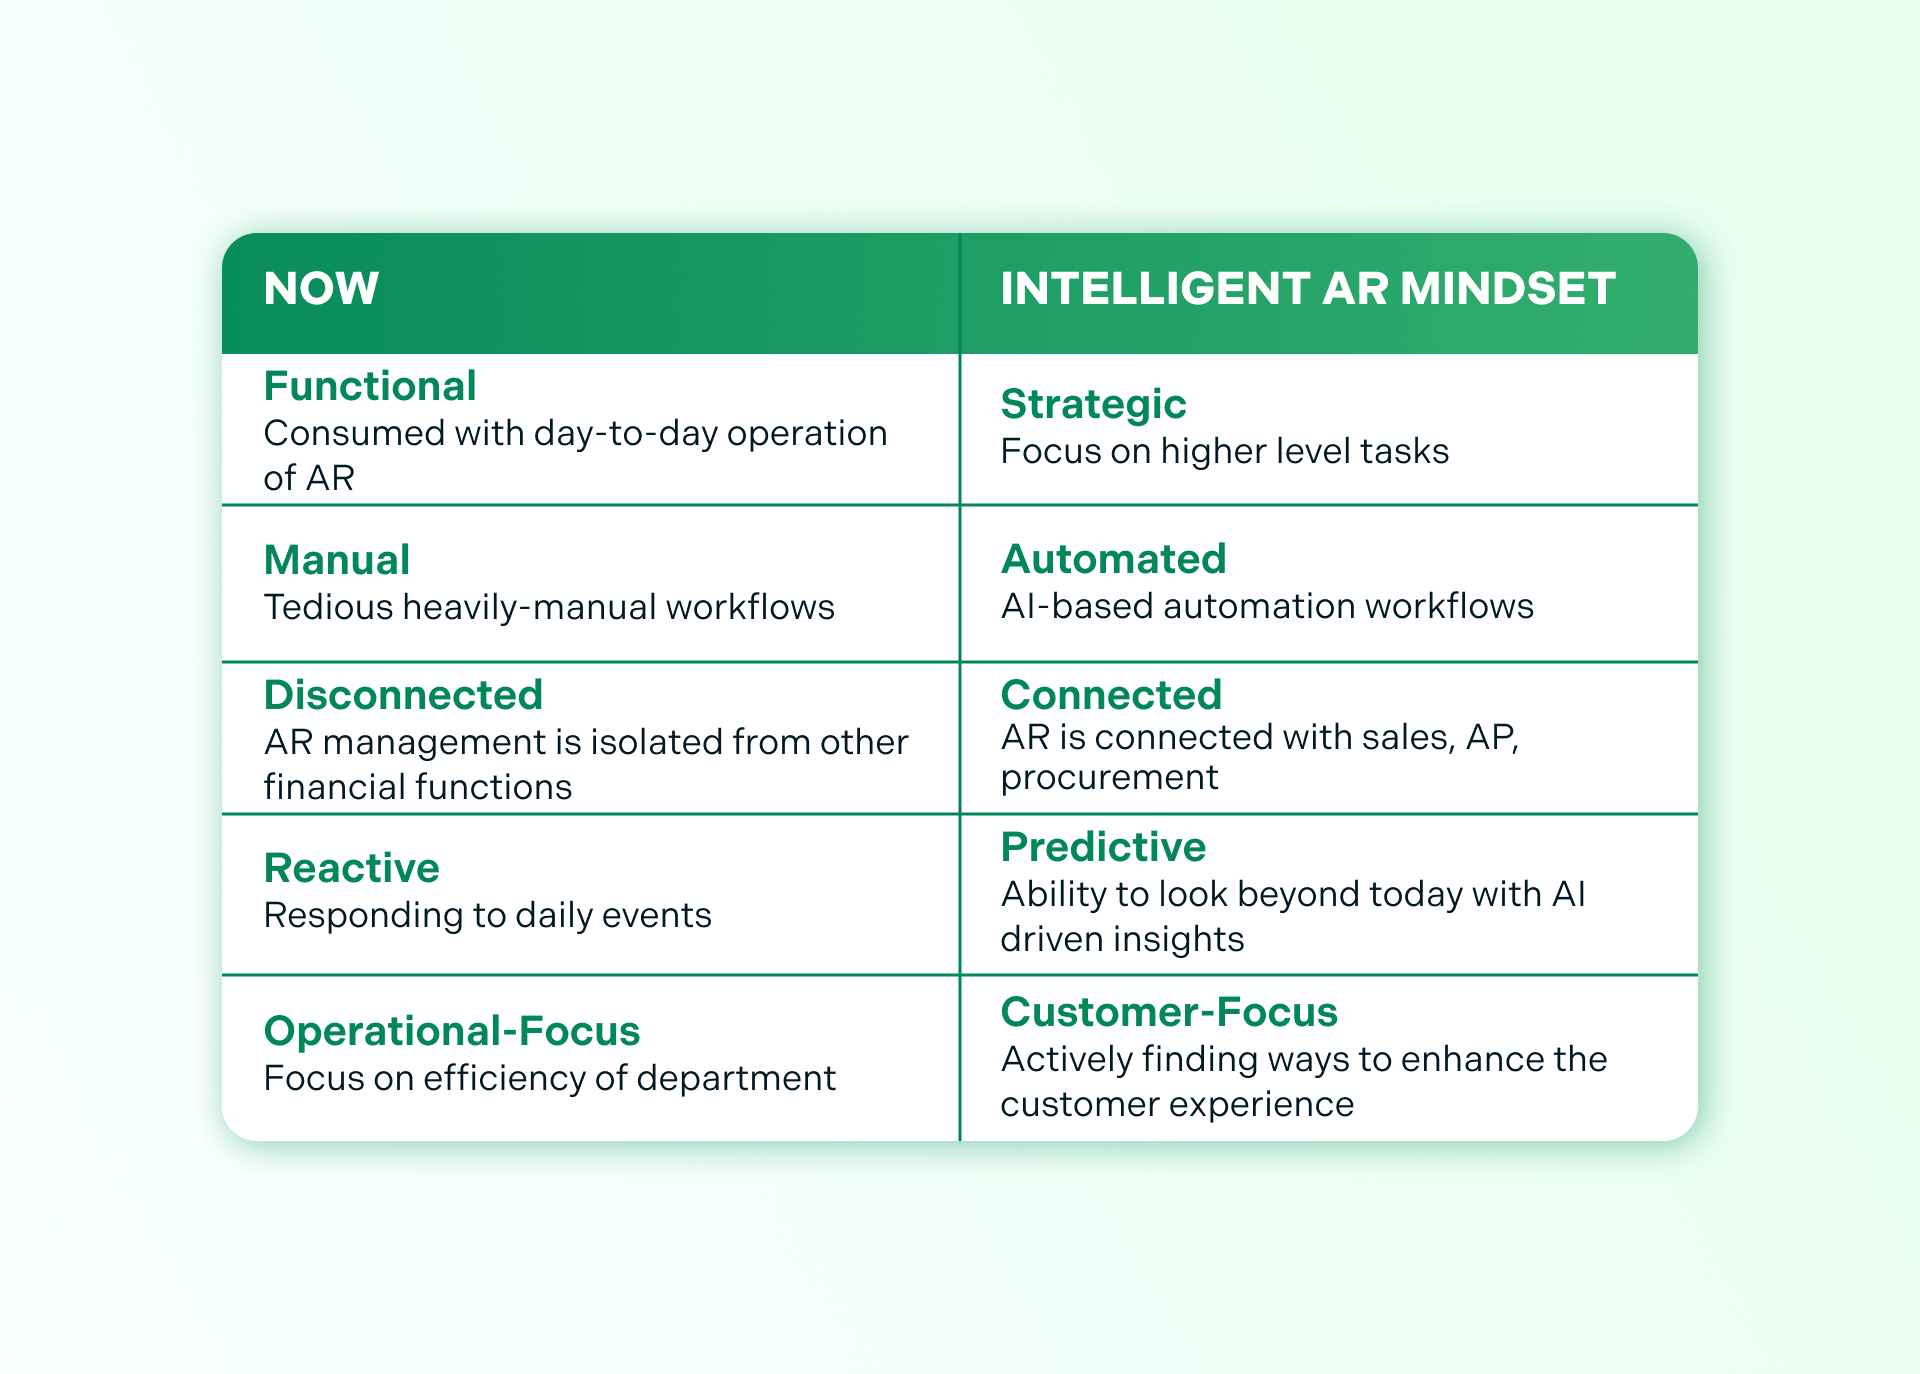 insights into the evolving role of the cfo-shifting to an intelligent AR mindset table showing current practices vs. an intelligent ar mindset